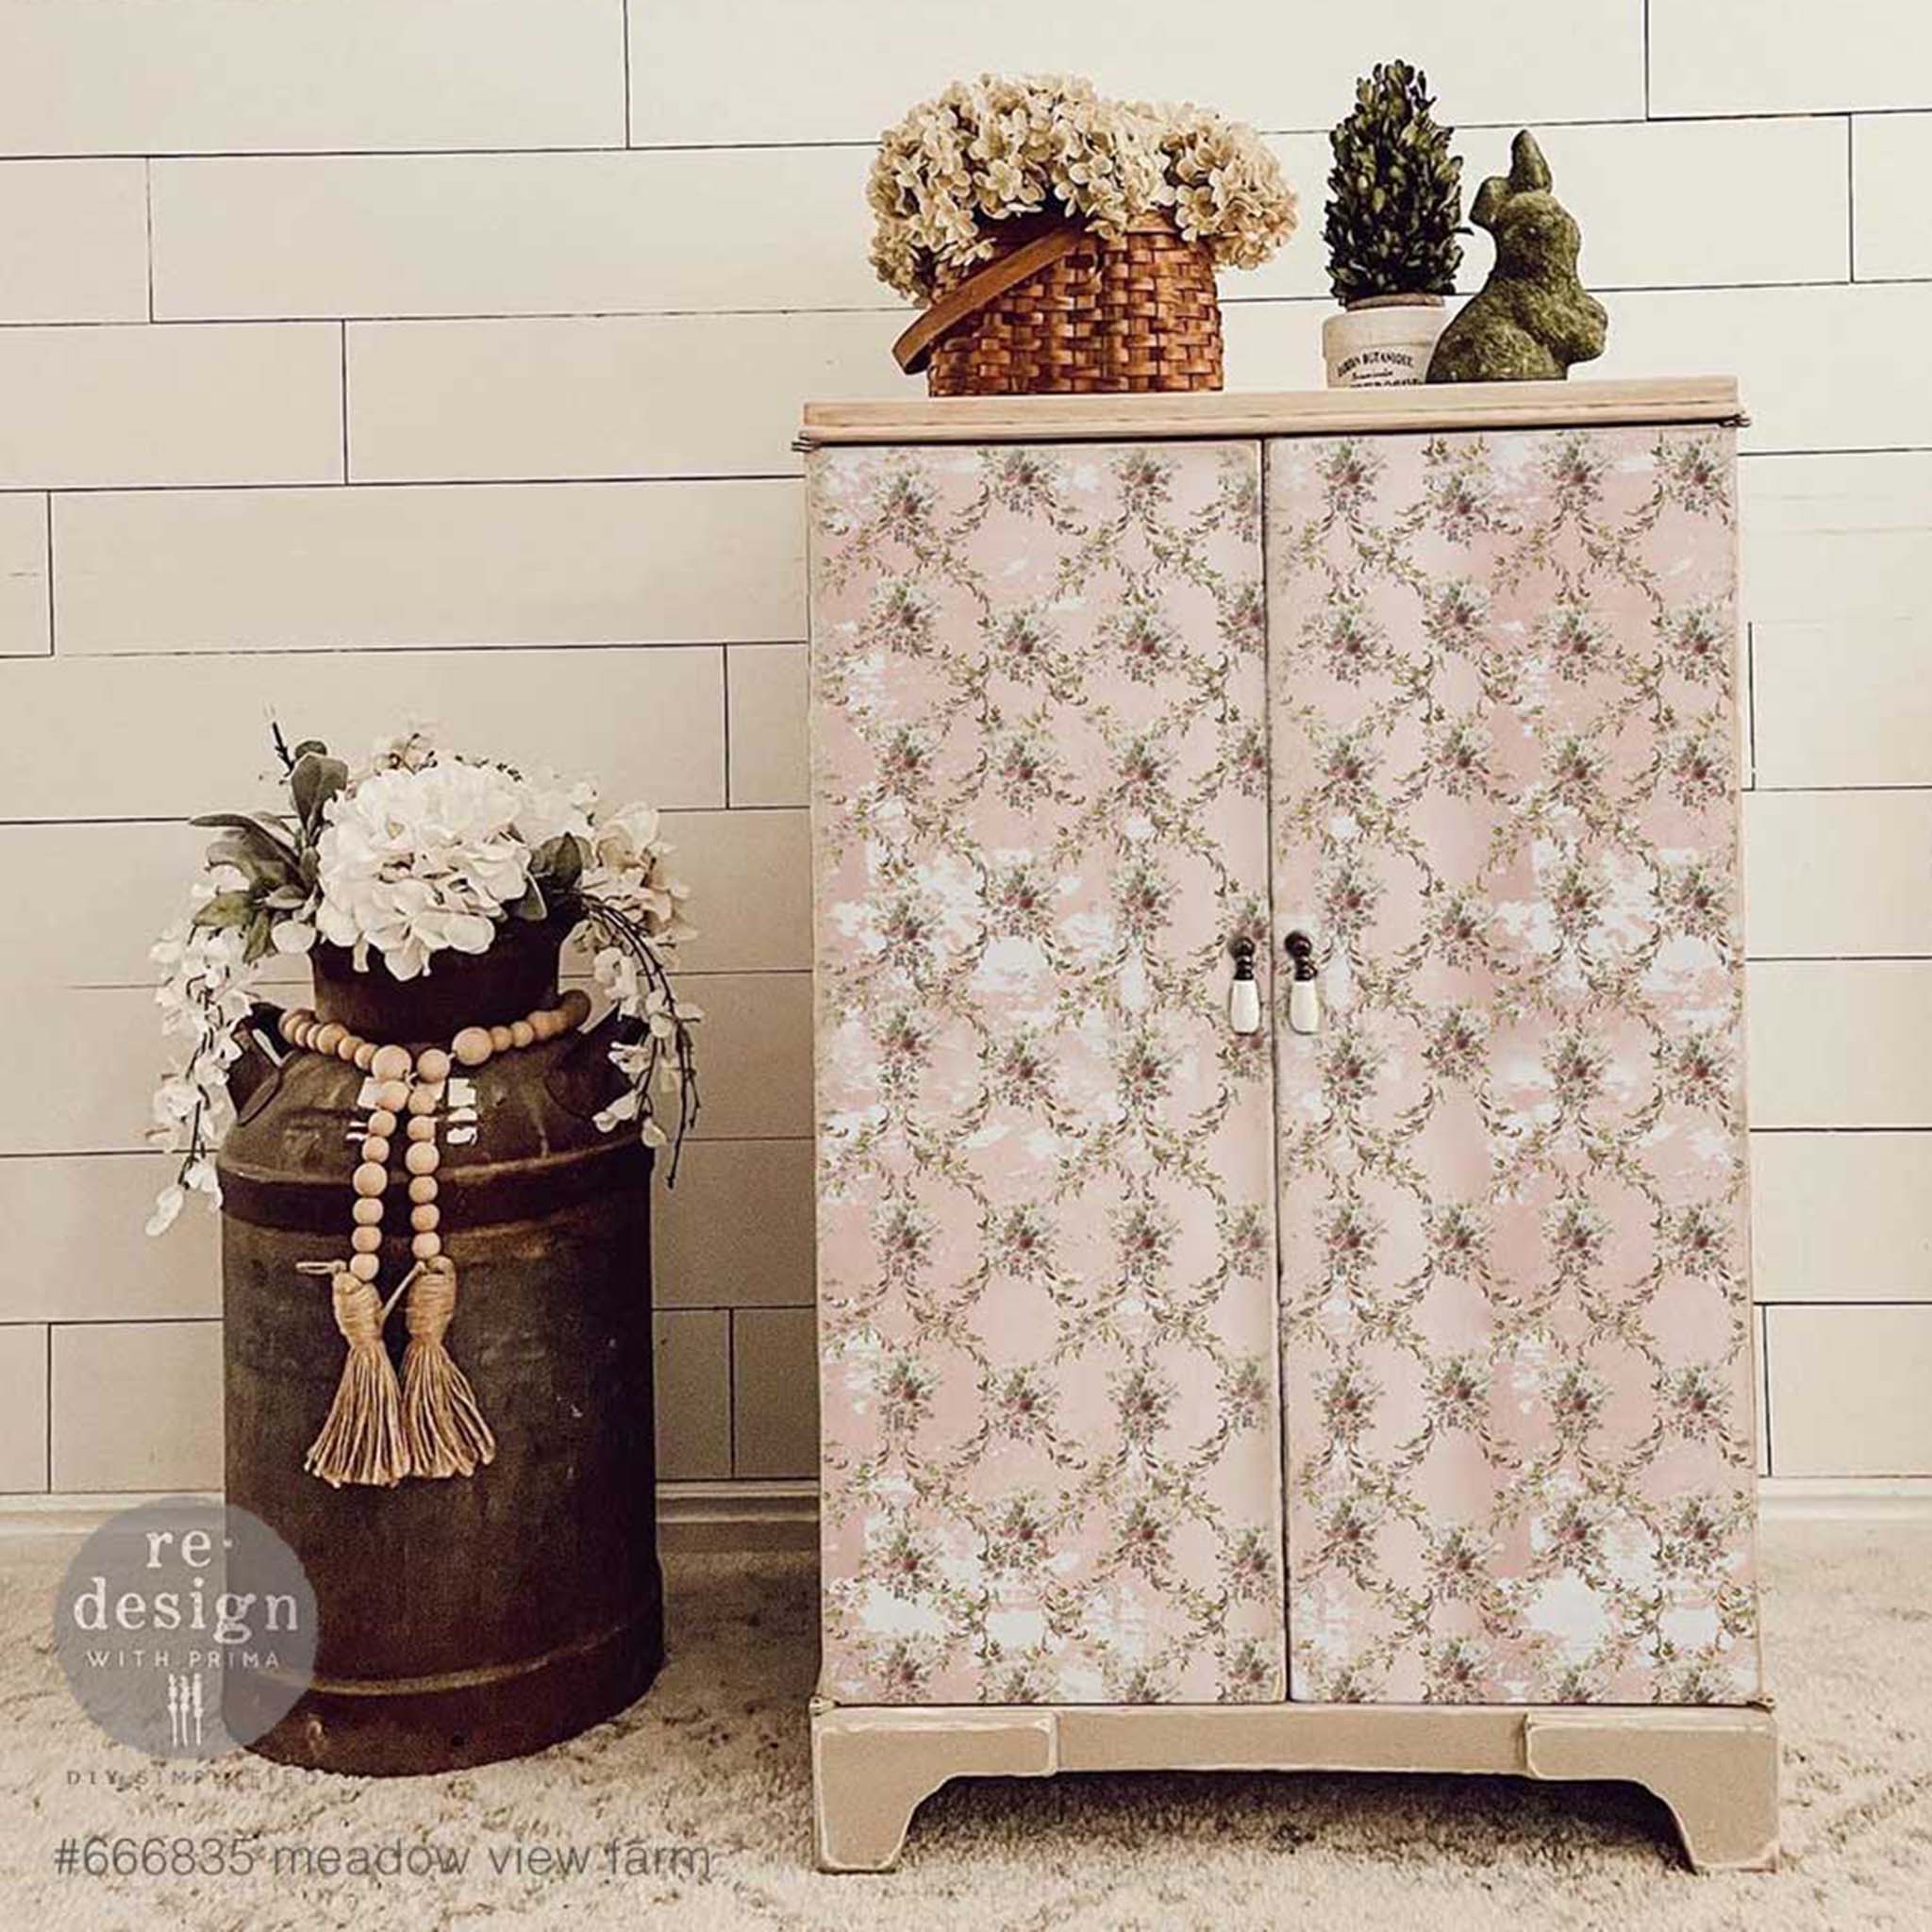 A vintage bathroom storage cabinet is natural wood and features ReDesign with Prima's Meadow View Farm tissue paper on its 2 doors.